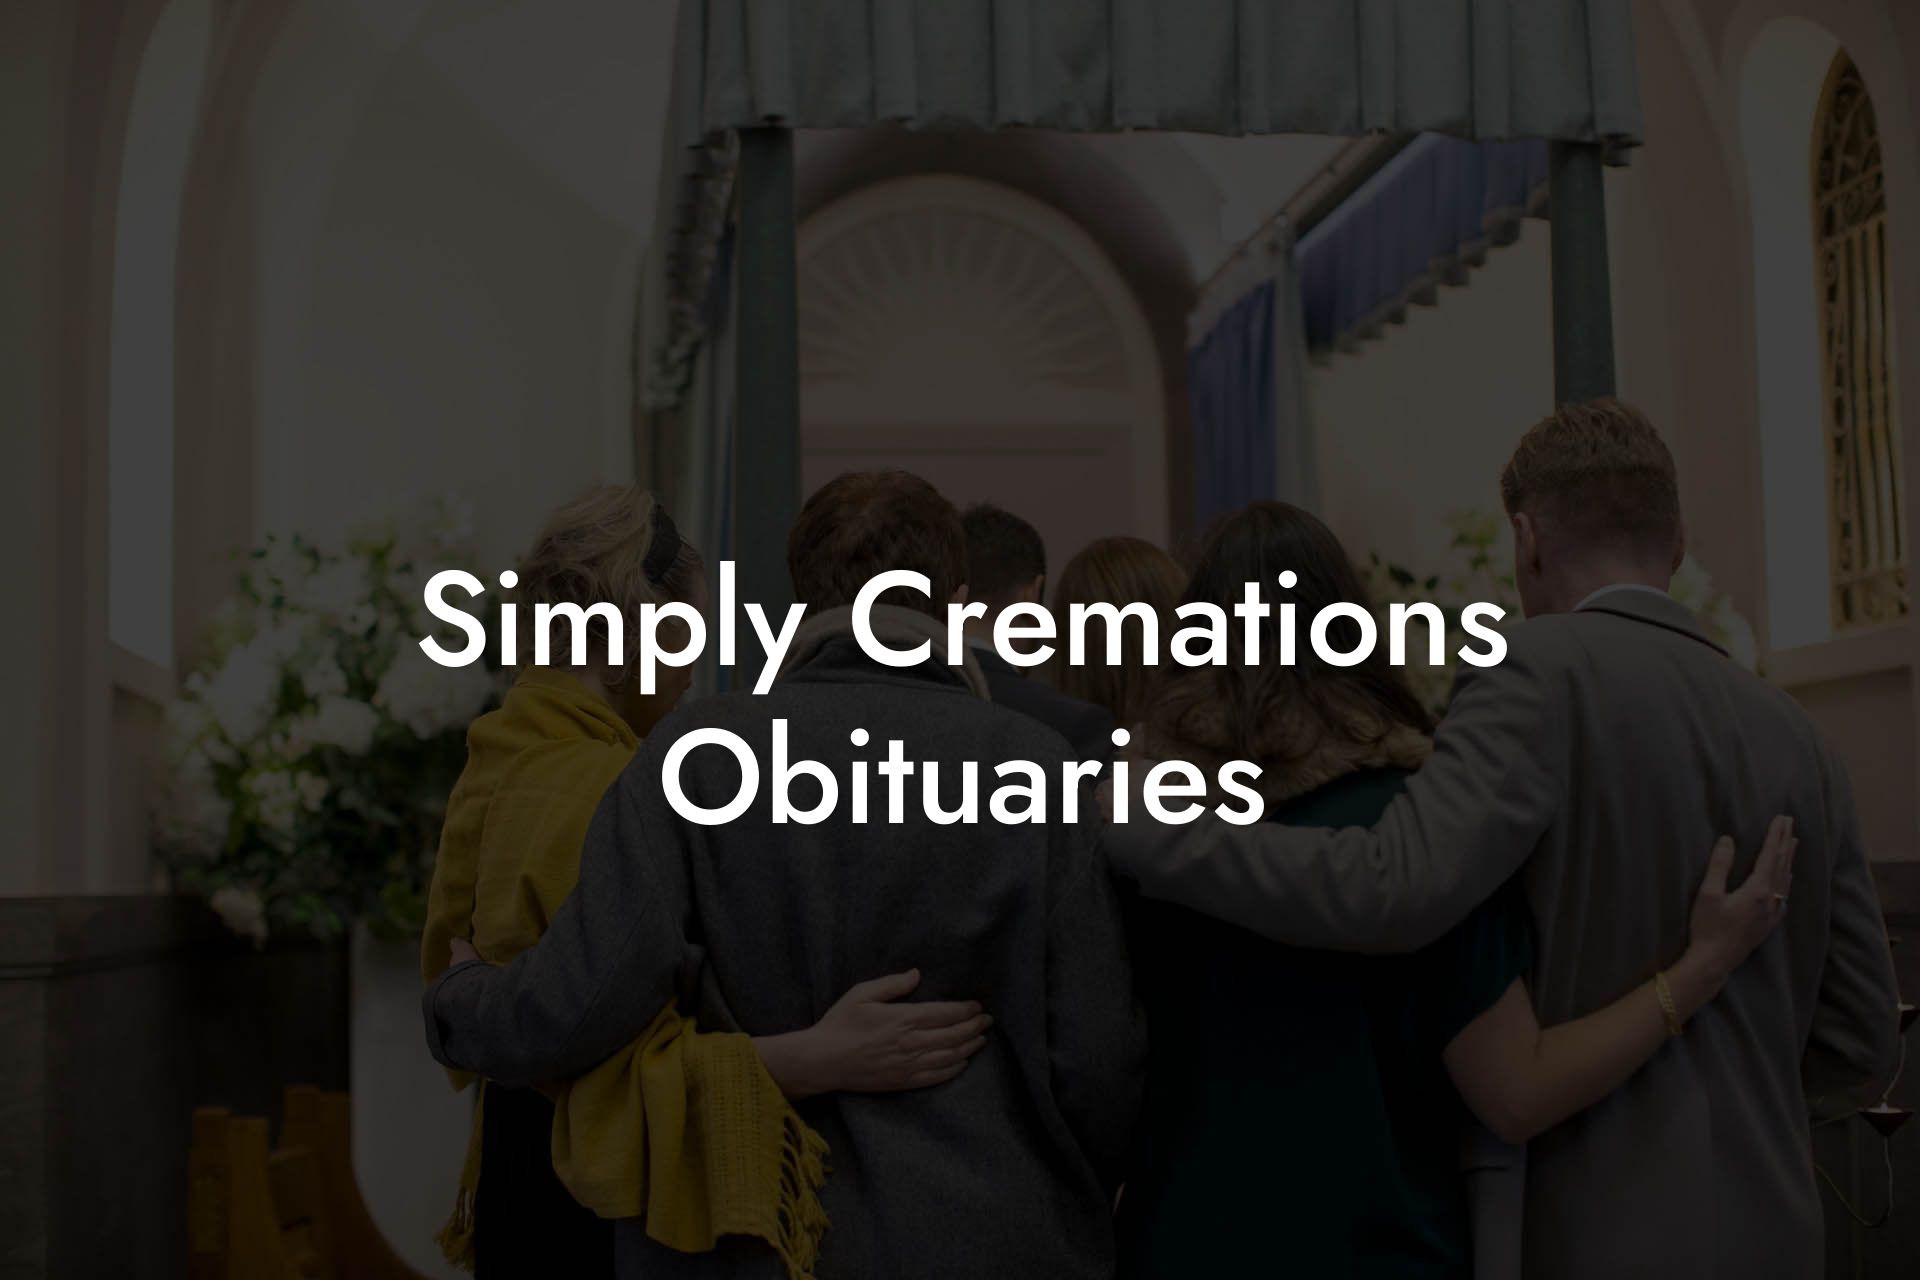 Simply Cremations Obituaries